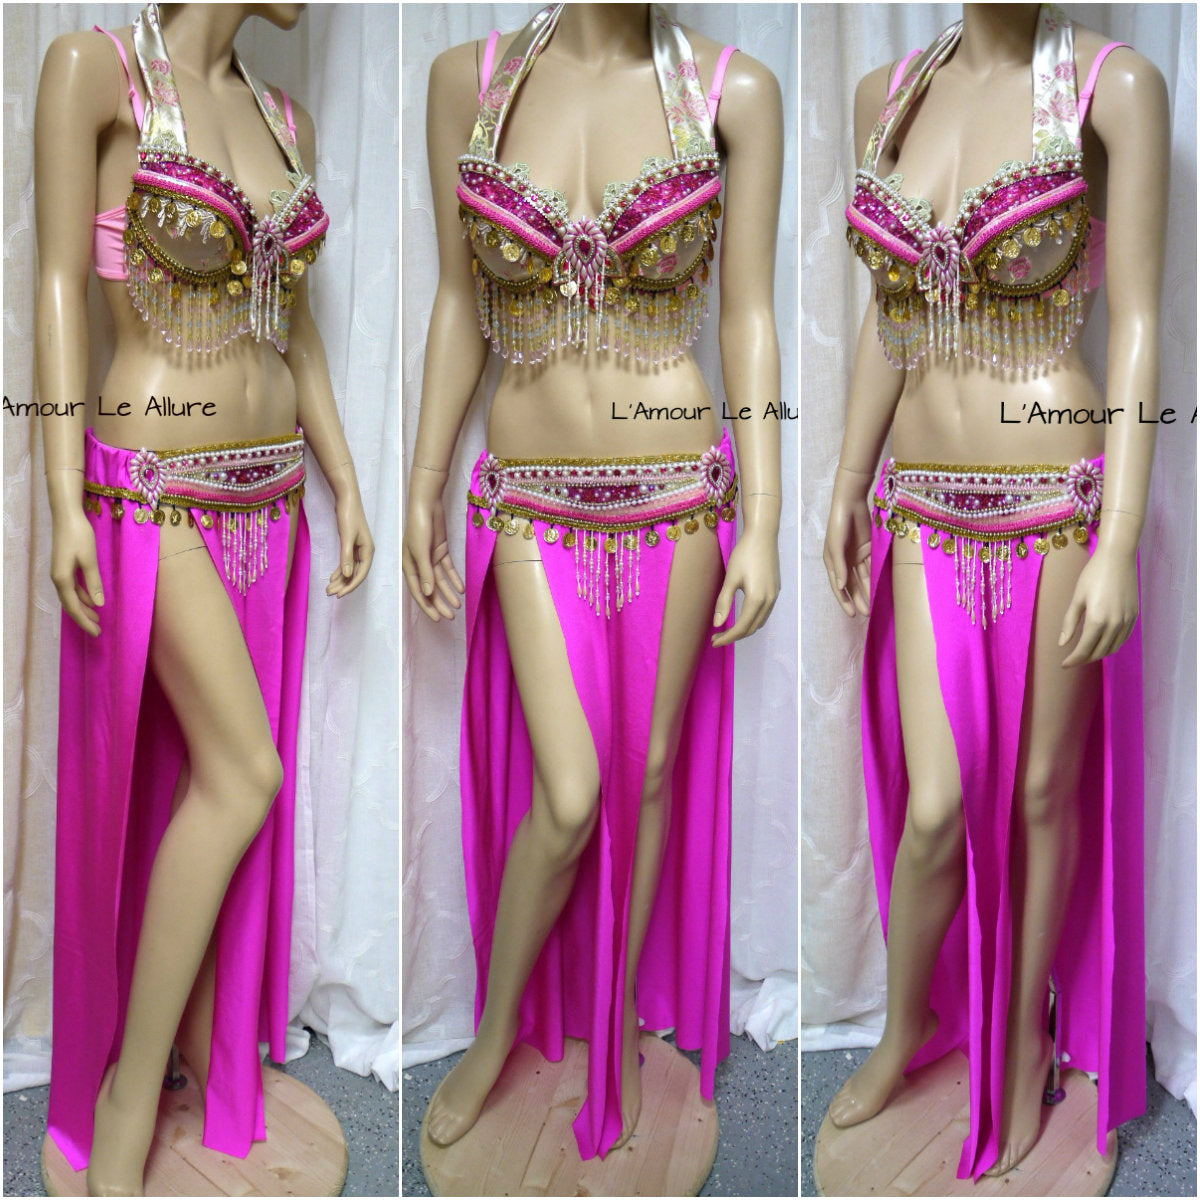 GODDESS OF PHOENICIA- Gold and Nude, Egyptian Bellydance Costume, by  Designer Rising Stars/ Dahlal